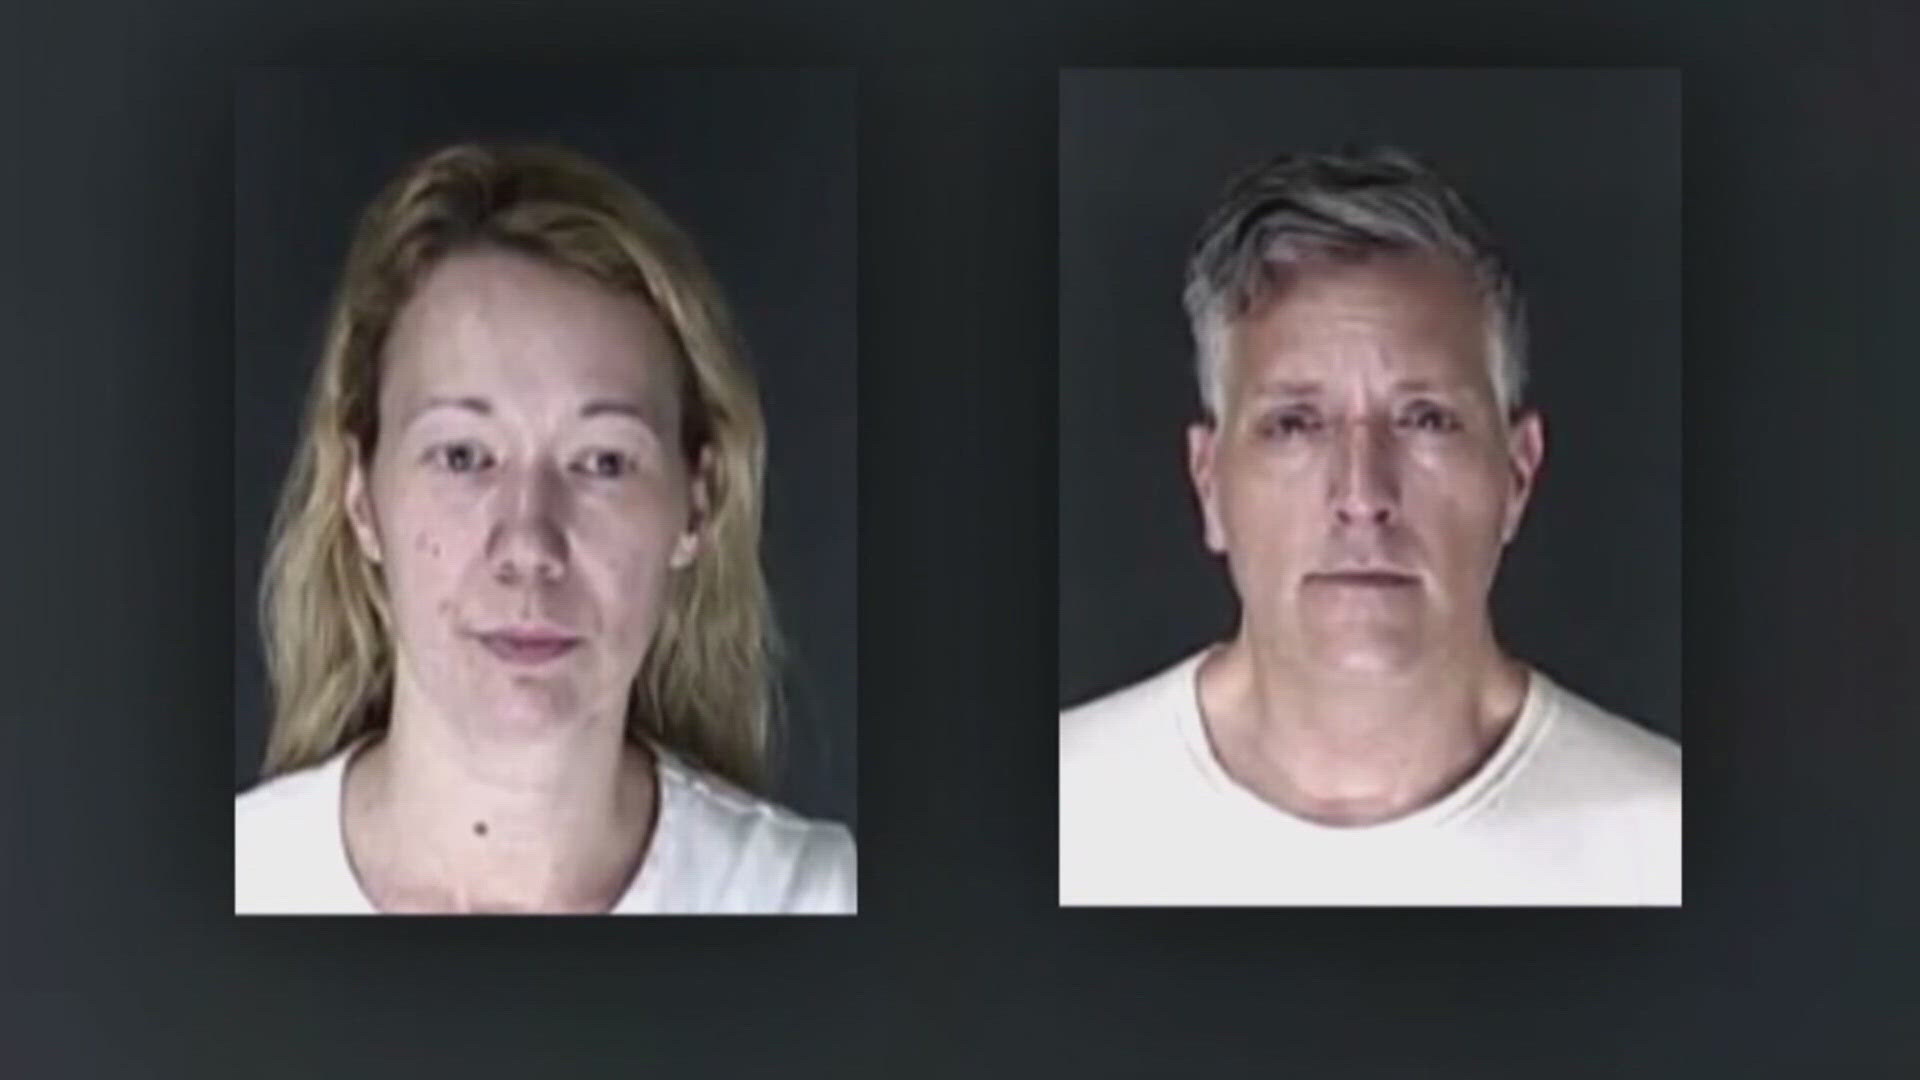 Return to Nature owners Jon Hallford and Carie Hallford are facing hundreds of charges after 190 bodies were found in the Penrose funeral home.